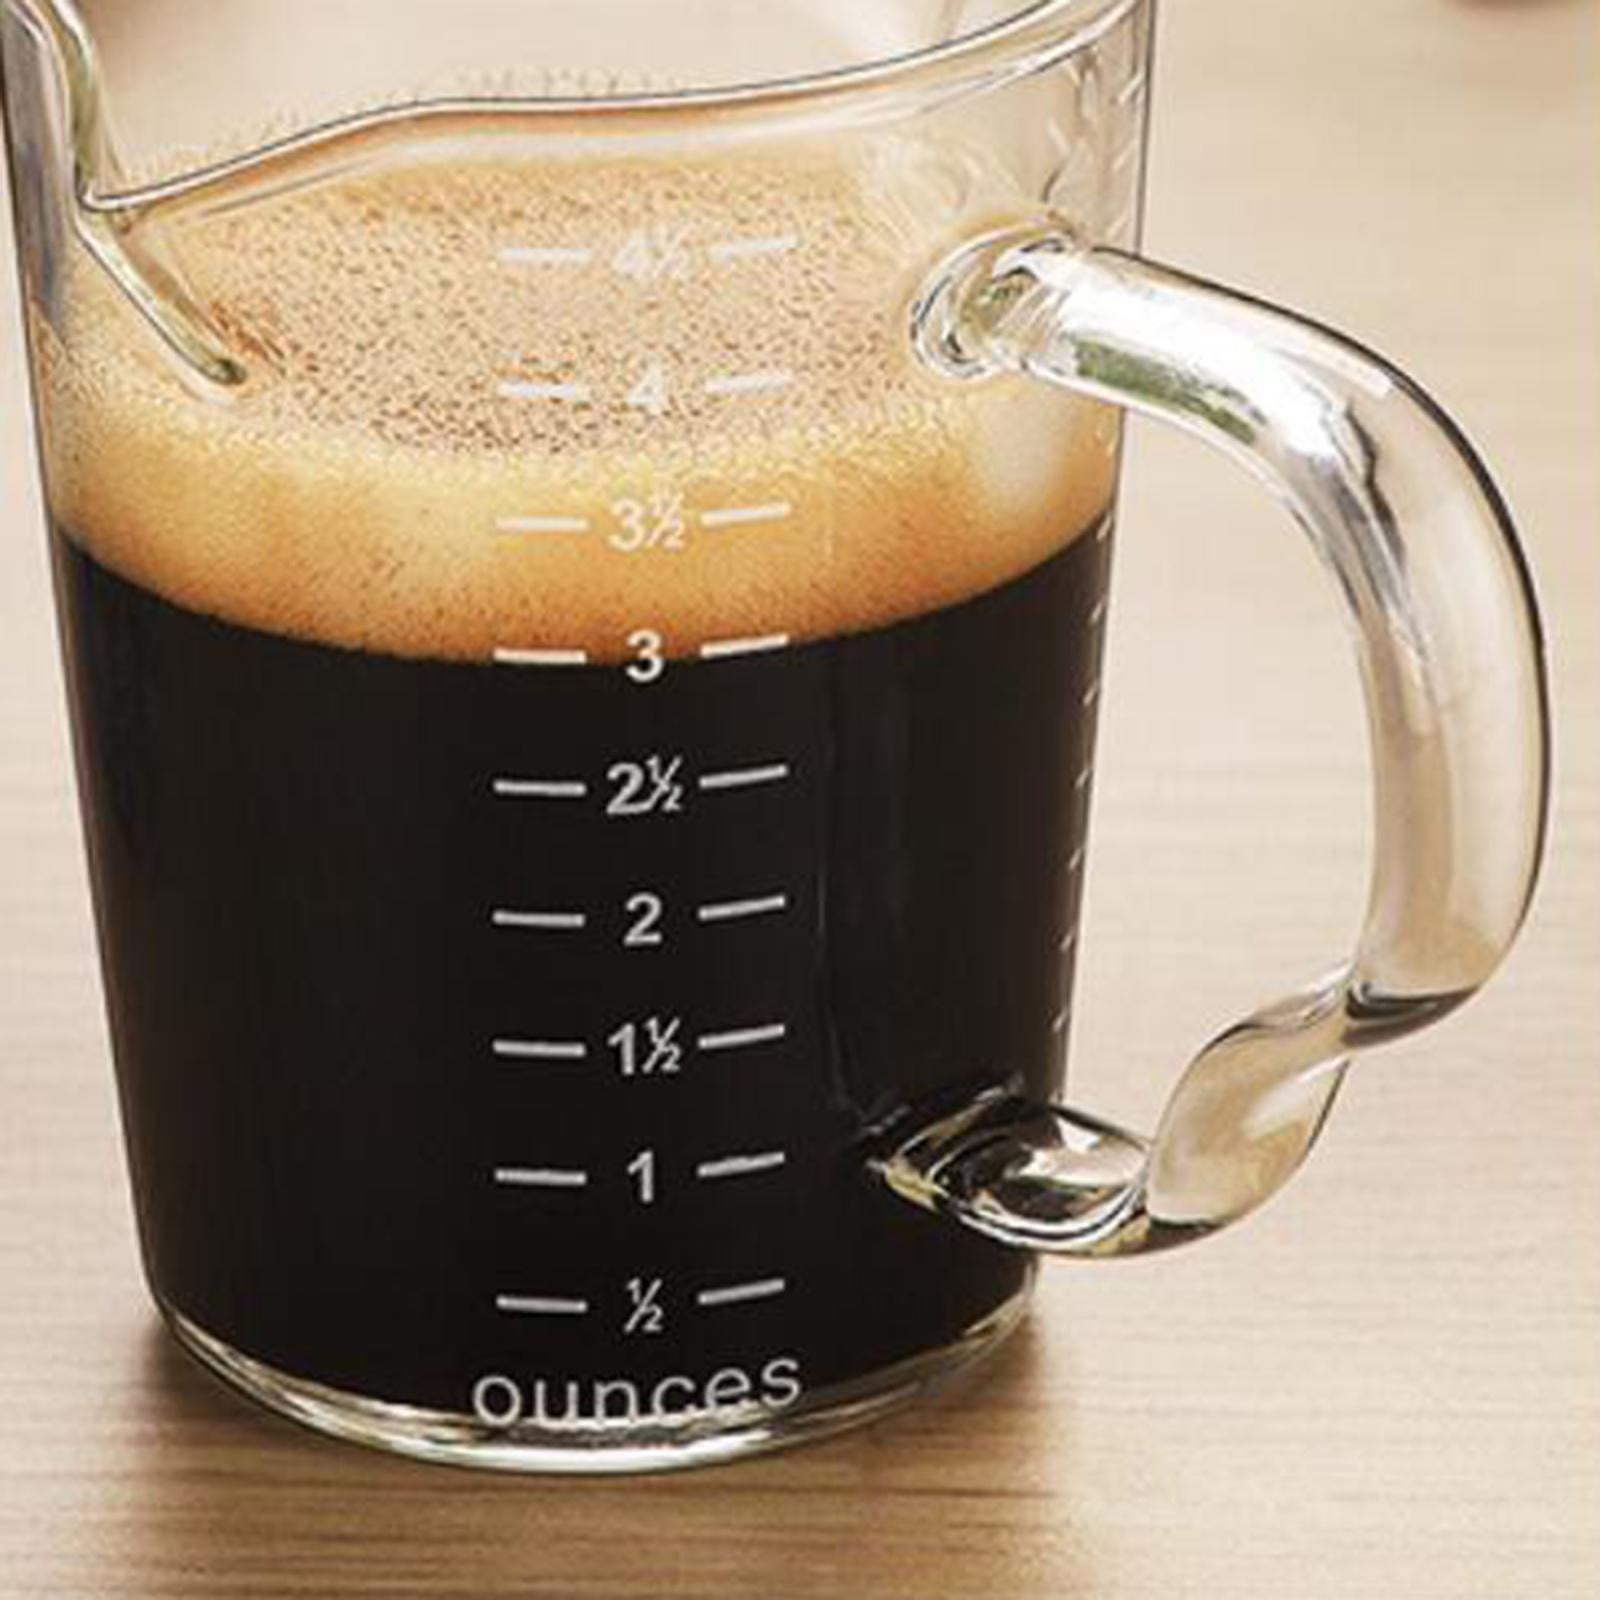 Espresso Milk Coffee Measuring Cup Mugs, Scale Heat Resistant Glass Cups,  Modern Drink Ware, Kitchen Cafe Mug Glasses, 70 75ML 